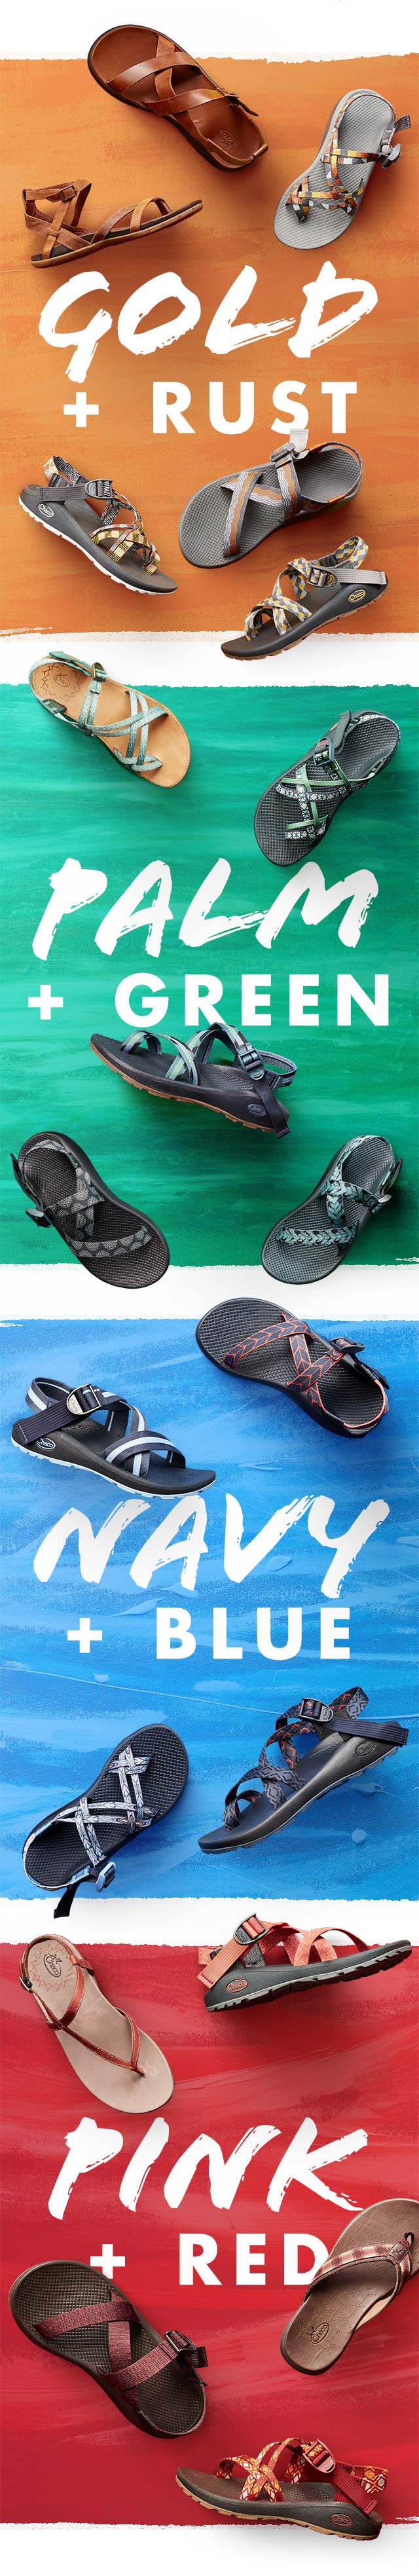 discounted chacos